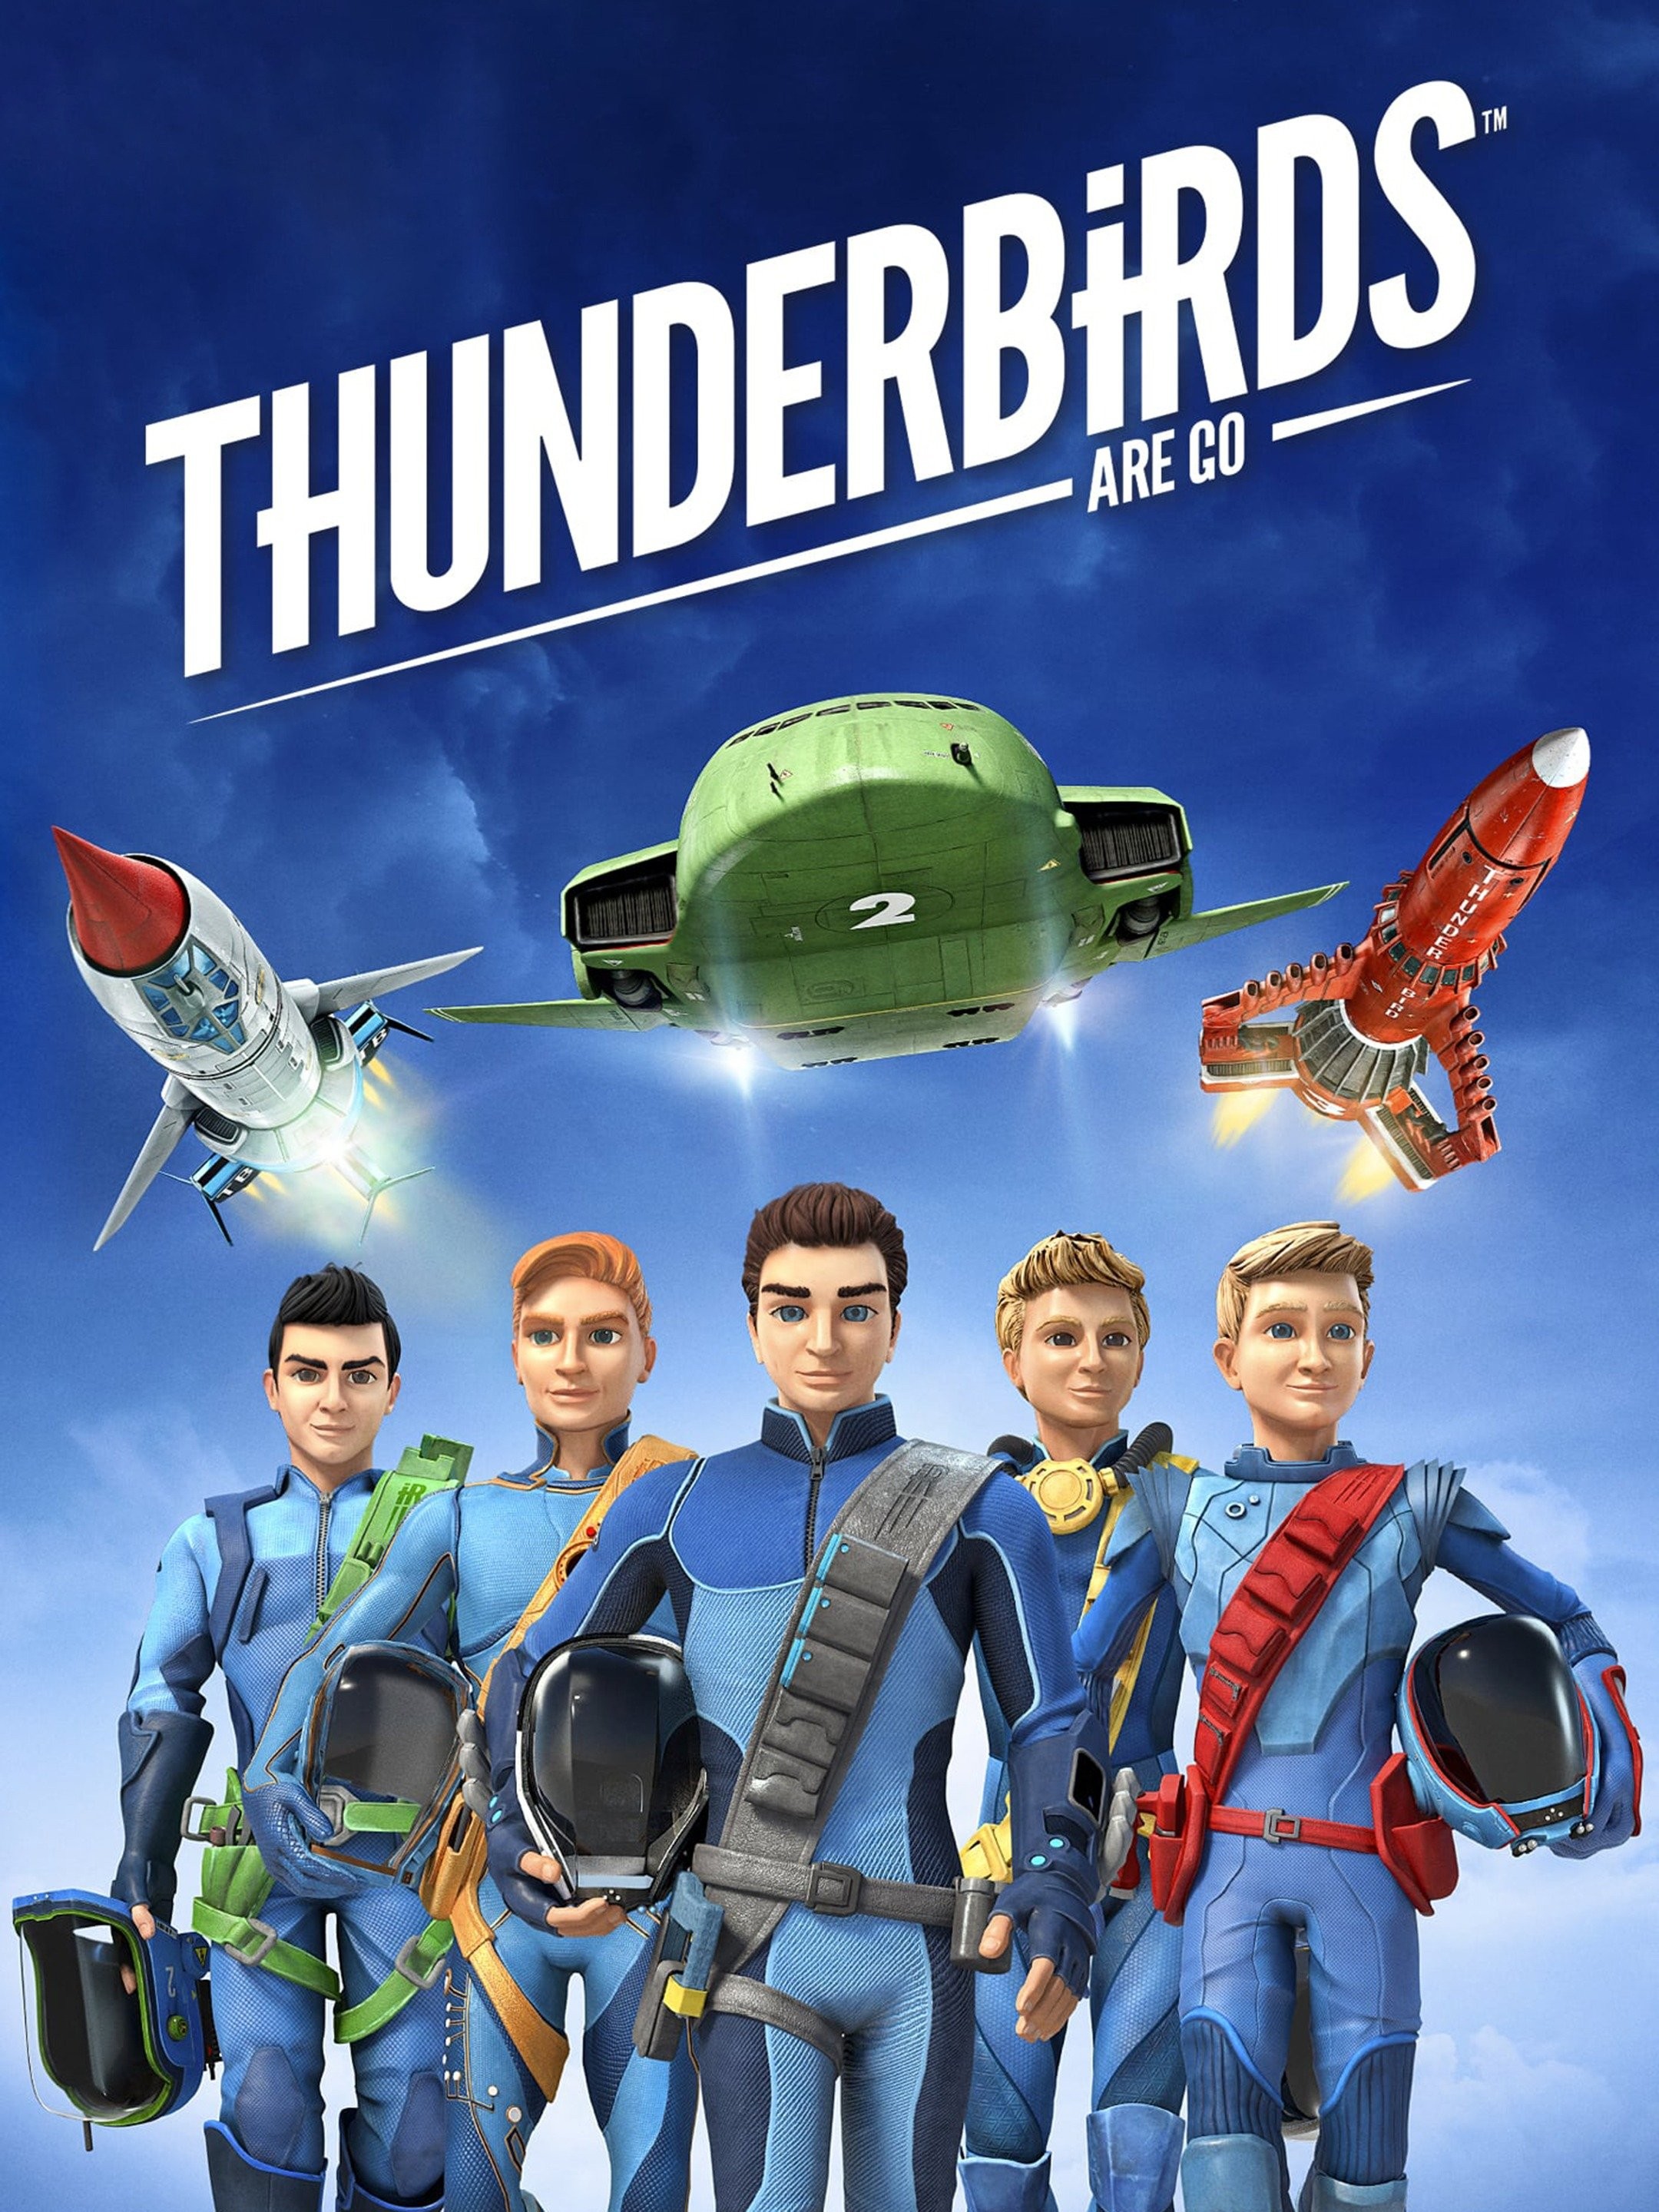 Thunderbirds Are Go!: The Complete Series